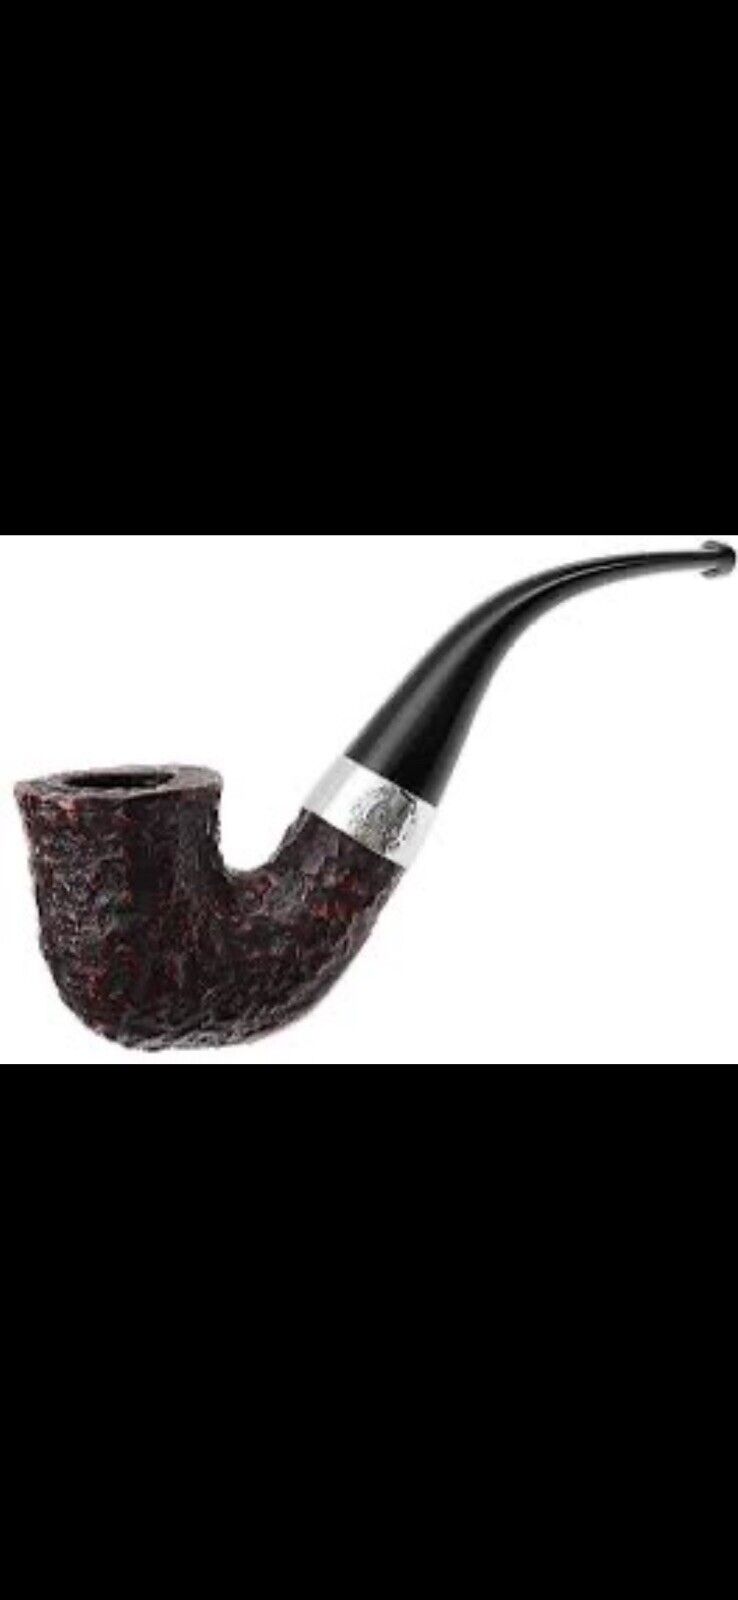 Peterson Donegal Rocky 05 Tobacco Pipe Fishtail